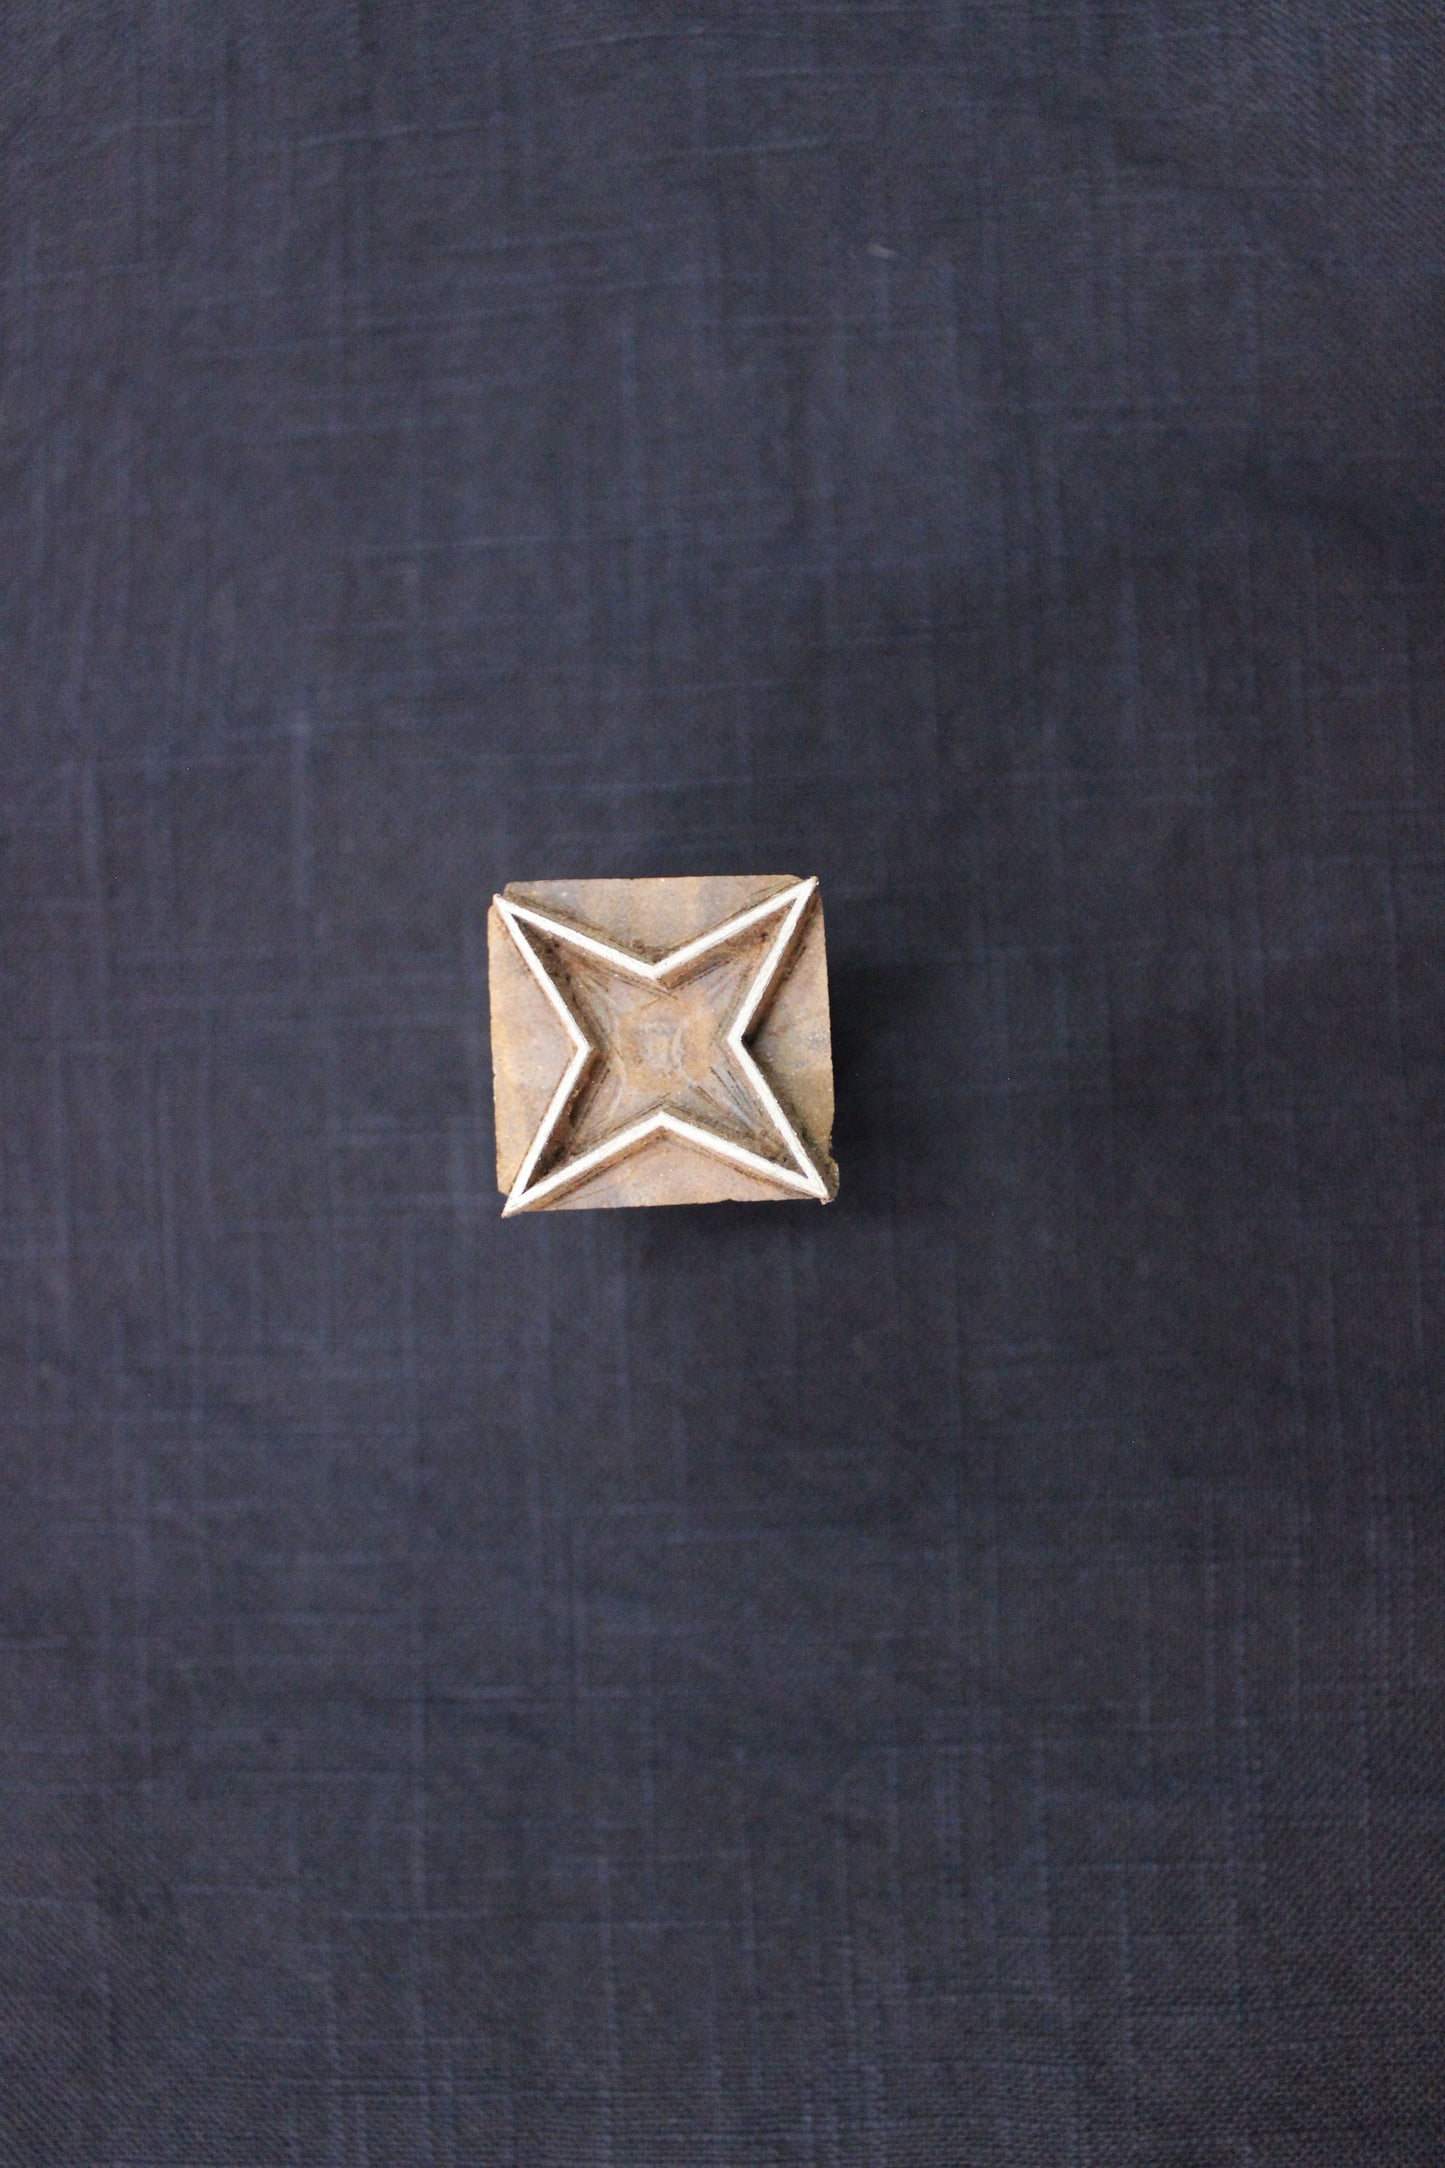 Star Wood Block Stamp Hand Carved Fabric Stamp Handmade Fabric Stamp Hand Carved Textile Printing Block For Printing Hand Carved Soap Stamp Traditional Textile Block